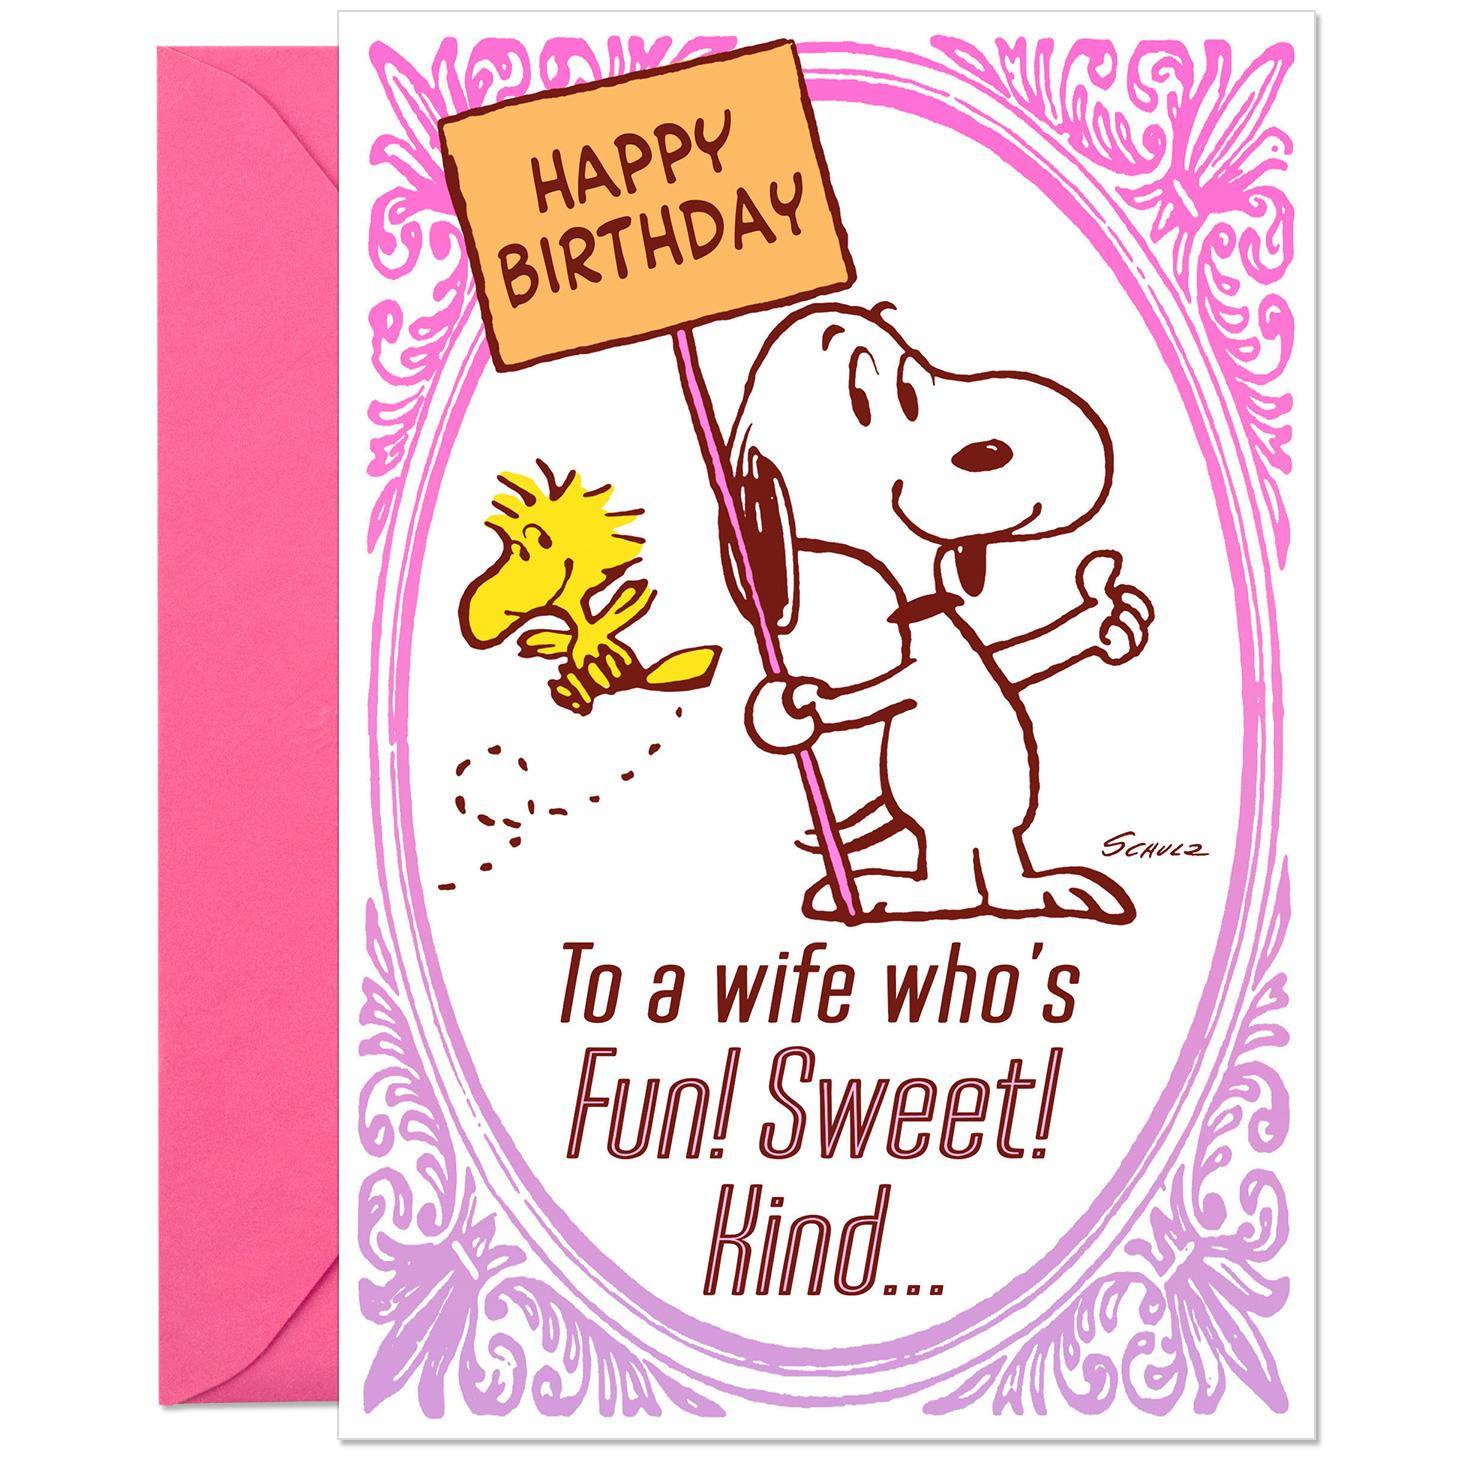 Funny Wife Birthday Cards
 Peanuts Snoopy and Woodstock Sweet Wife Funny Birthday